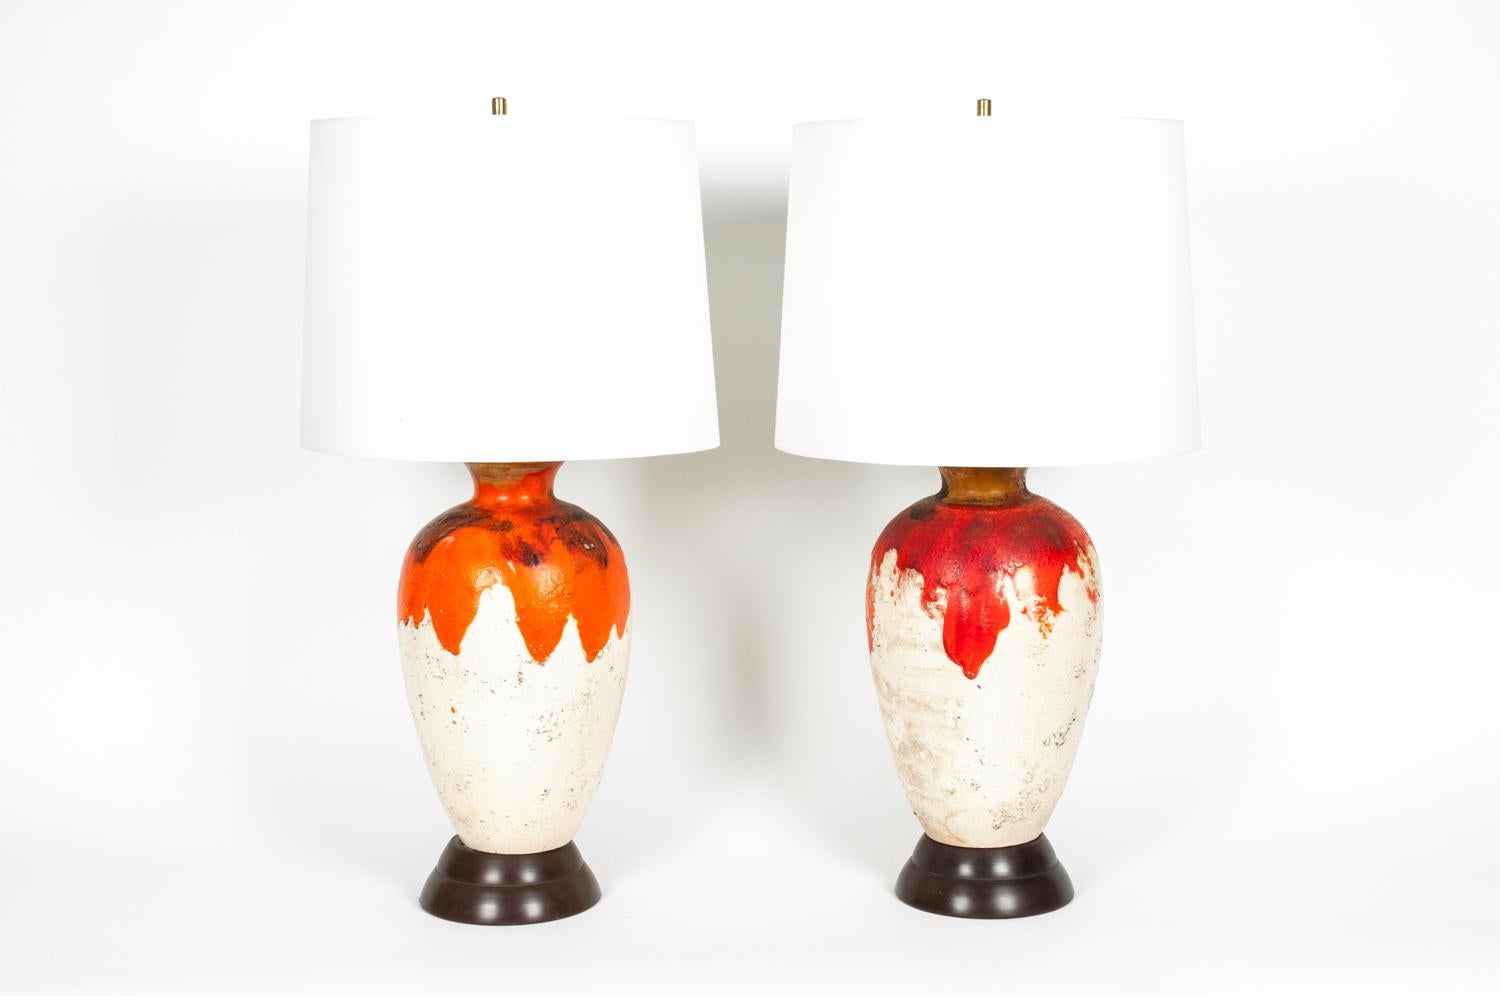 North American Vintage Pair of Drip Glazed Task or Table Lamps